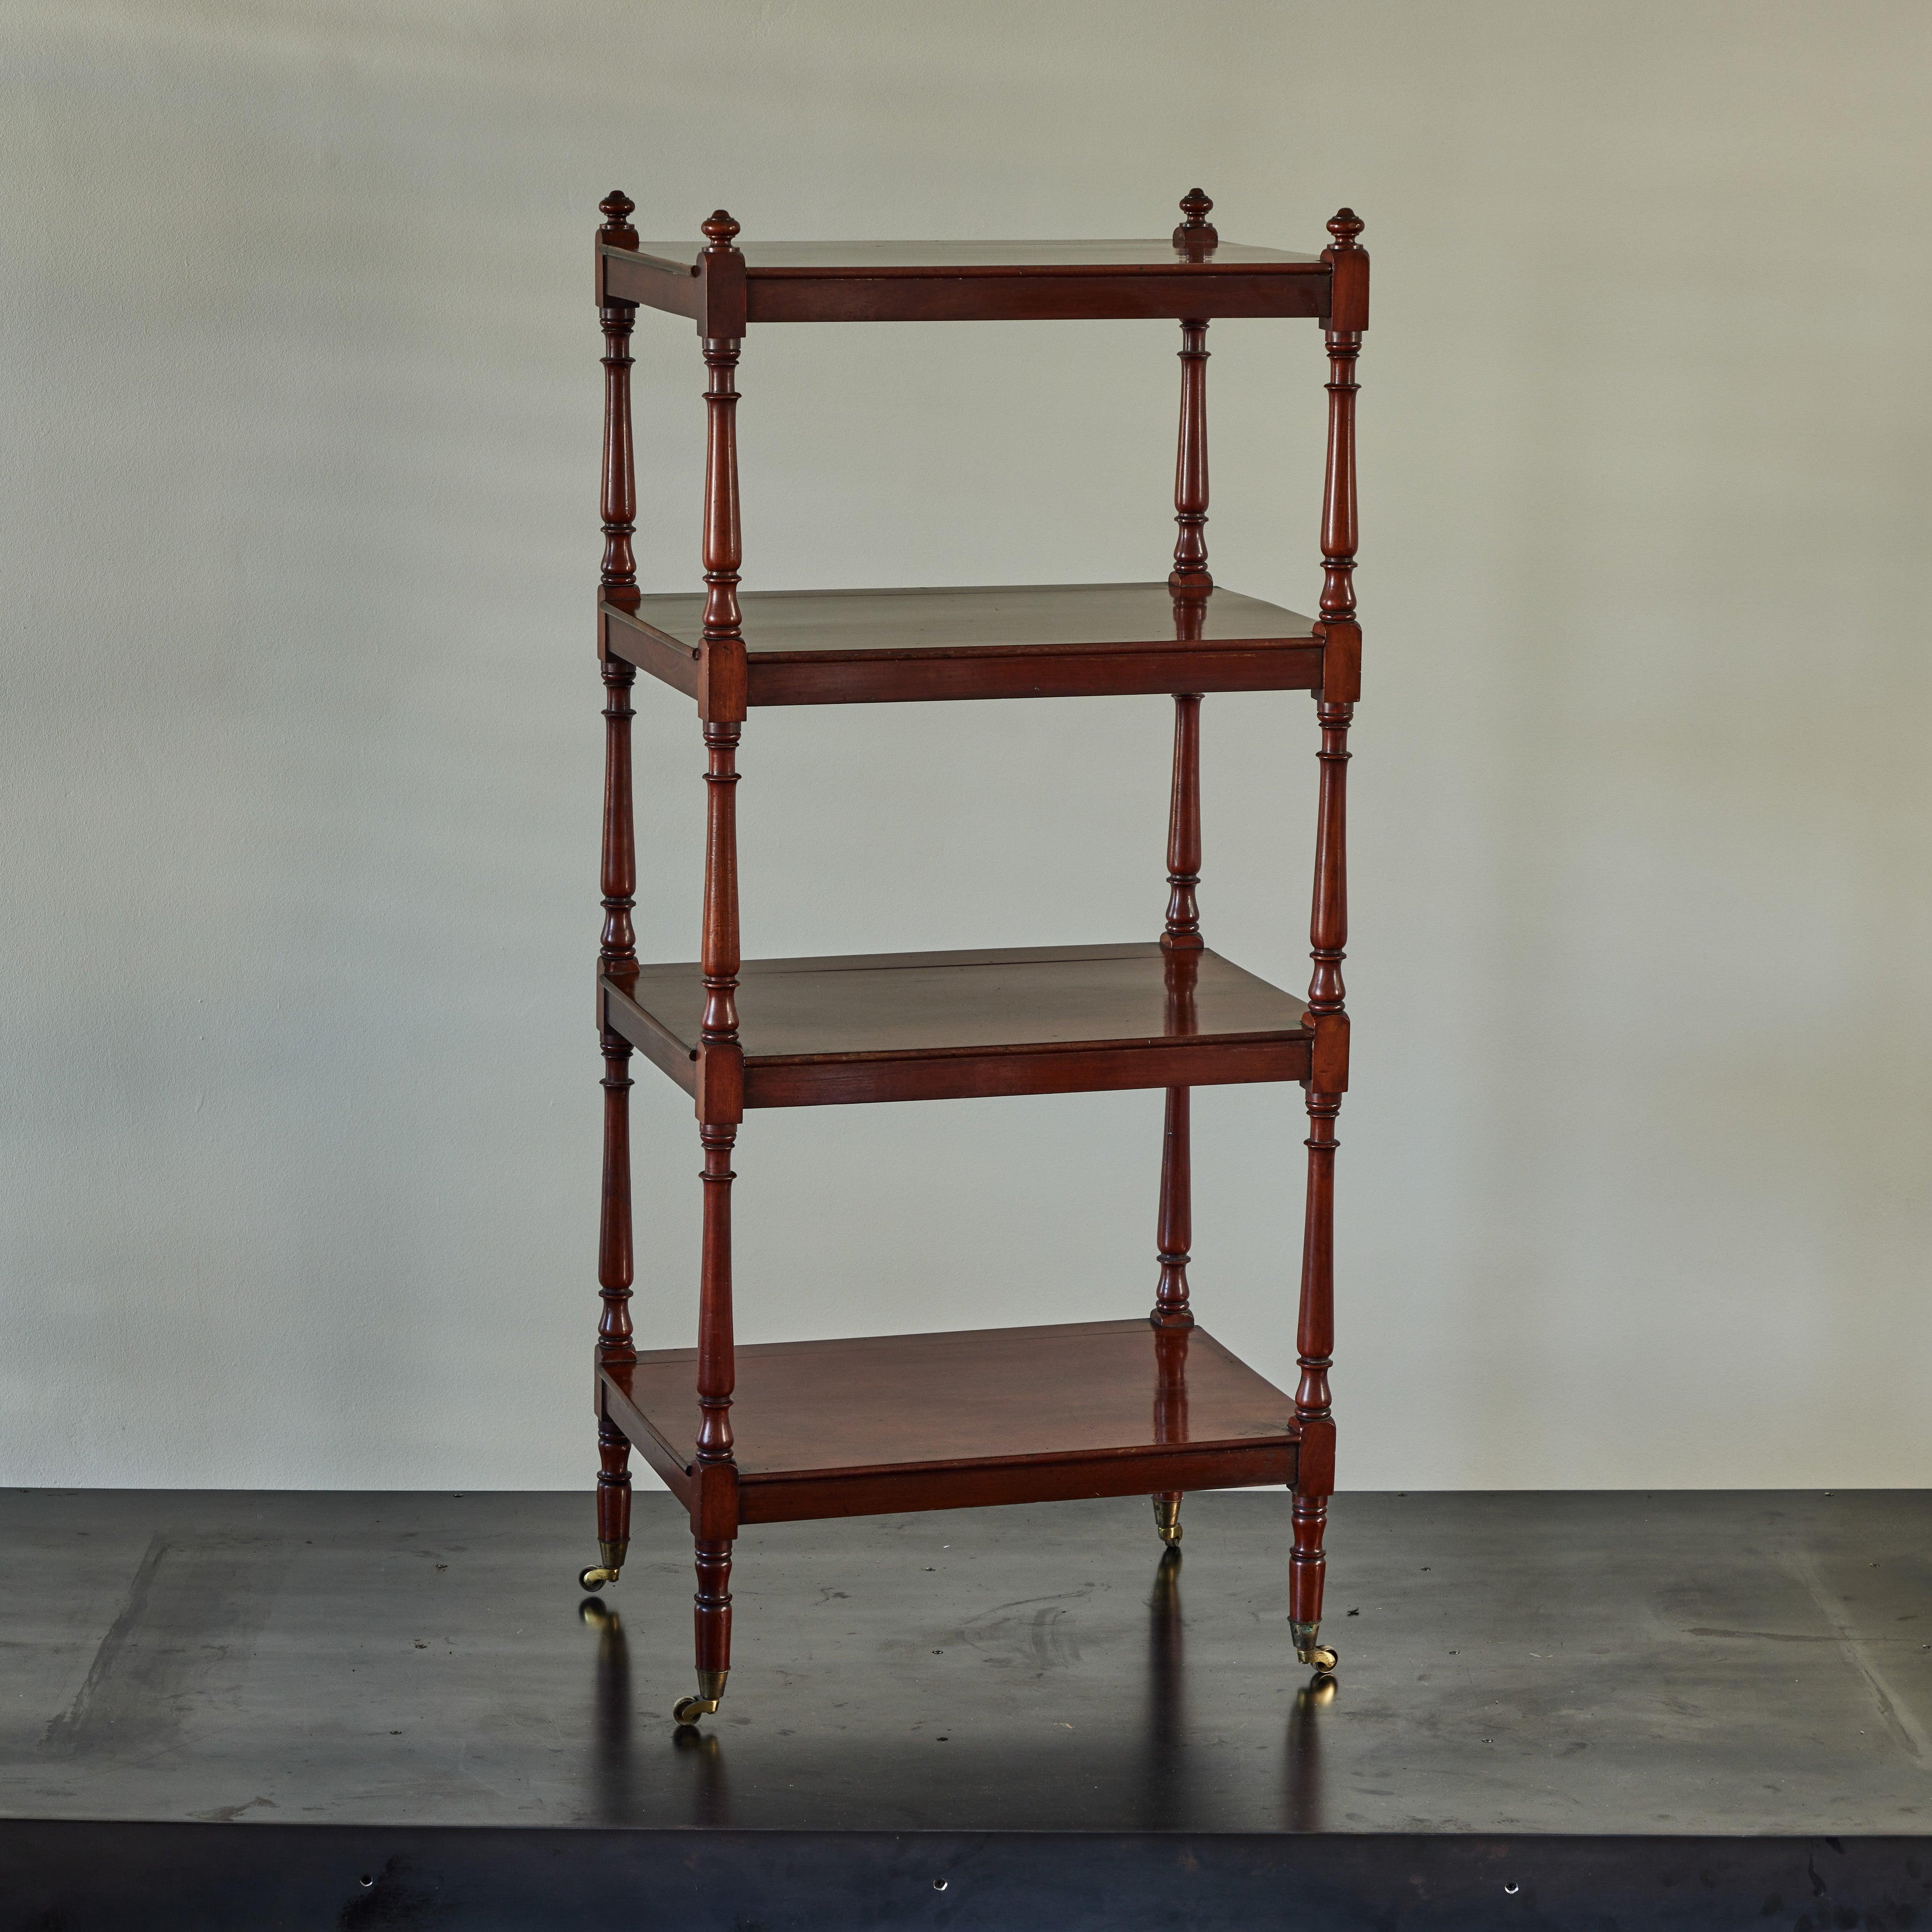 19th-Century English mahogany étagère. Featuring four well-spaced open shelves and elegant hand-carved spool shaped supports, this beautiful and traditional shelving unit is mounted on casters for increased versatility. A timeless piece with a